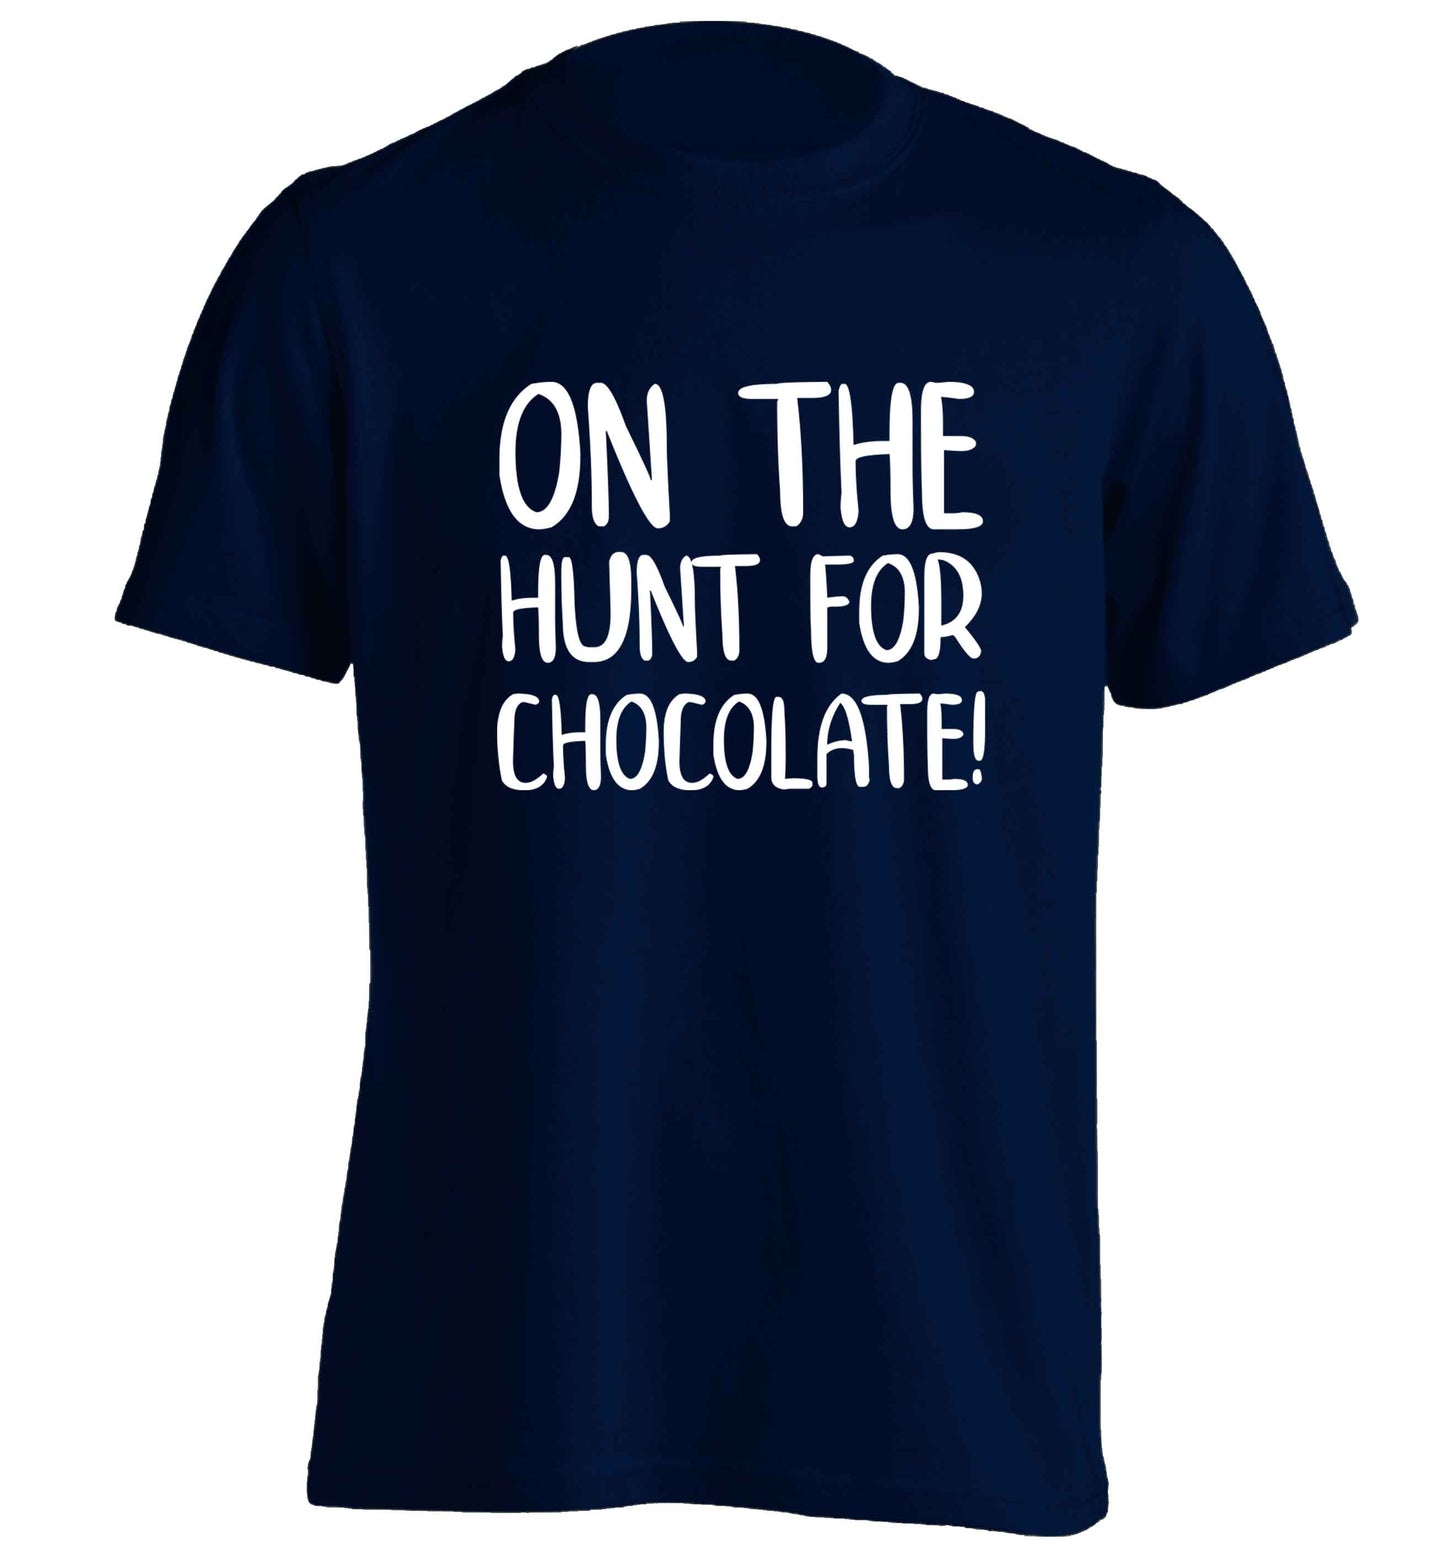 On the hunt for chocolate! adults unisex navy Tshirt 2XL